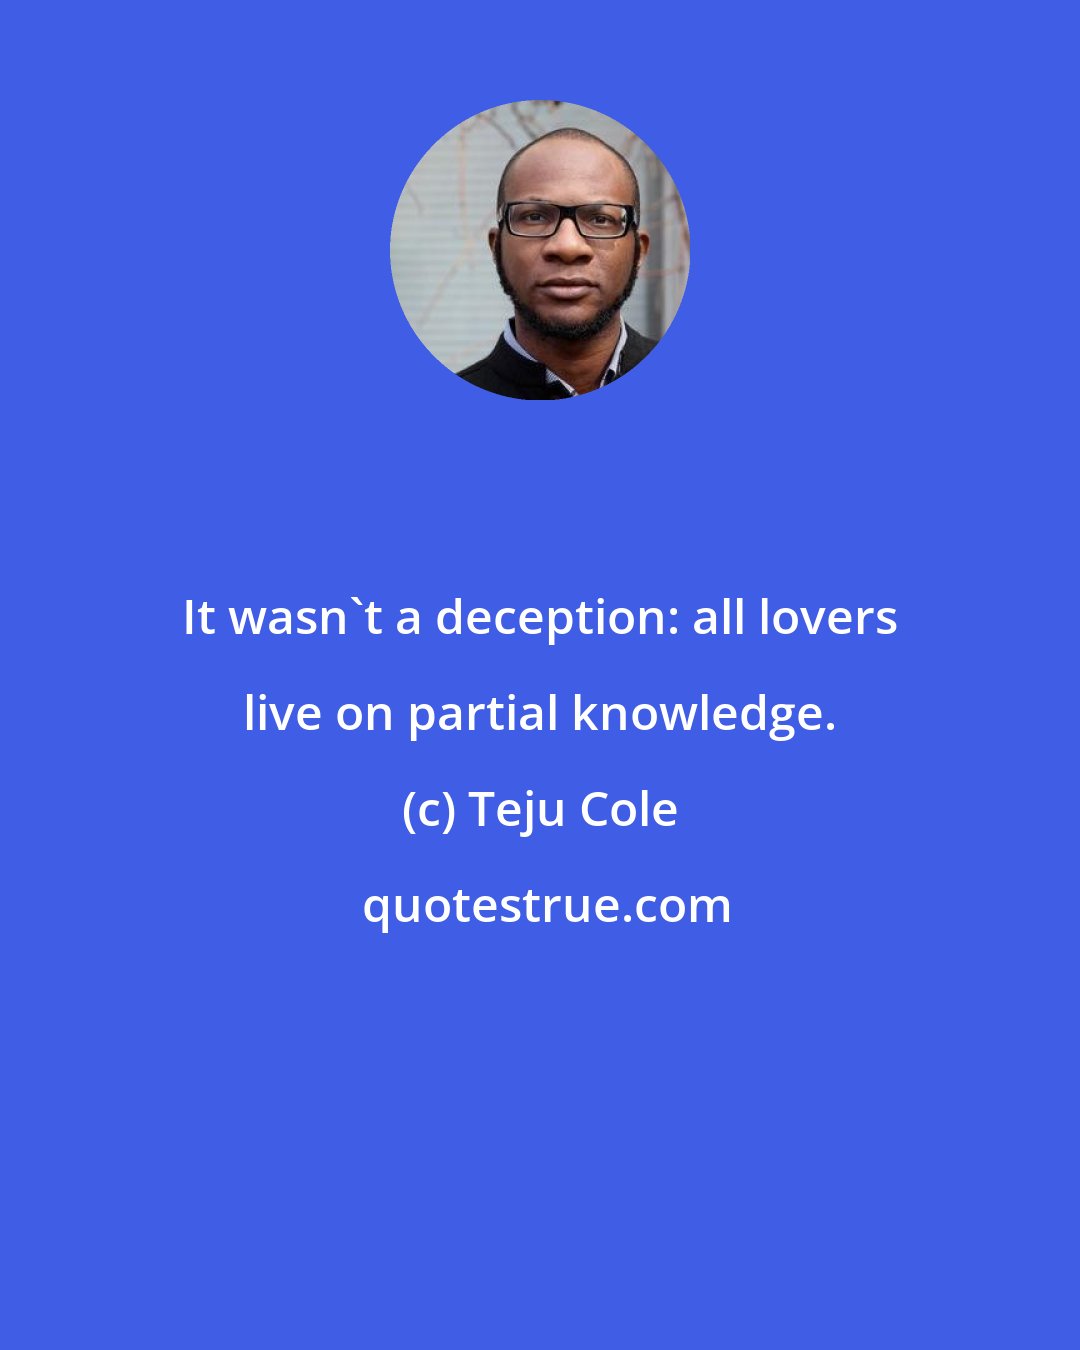 Teju Cole: It wasn't a deception: all lovers live on partial knowledge.